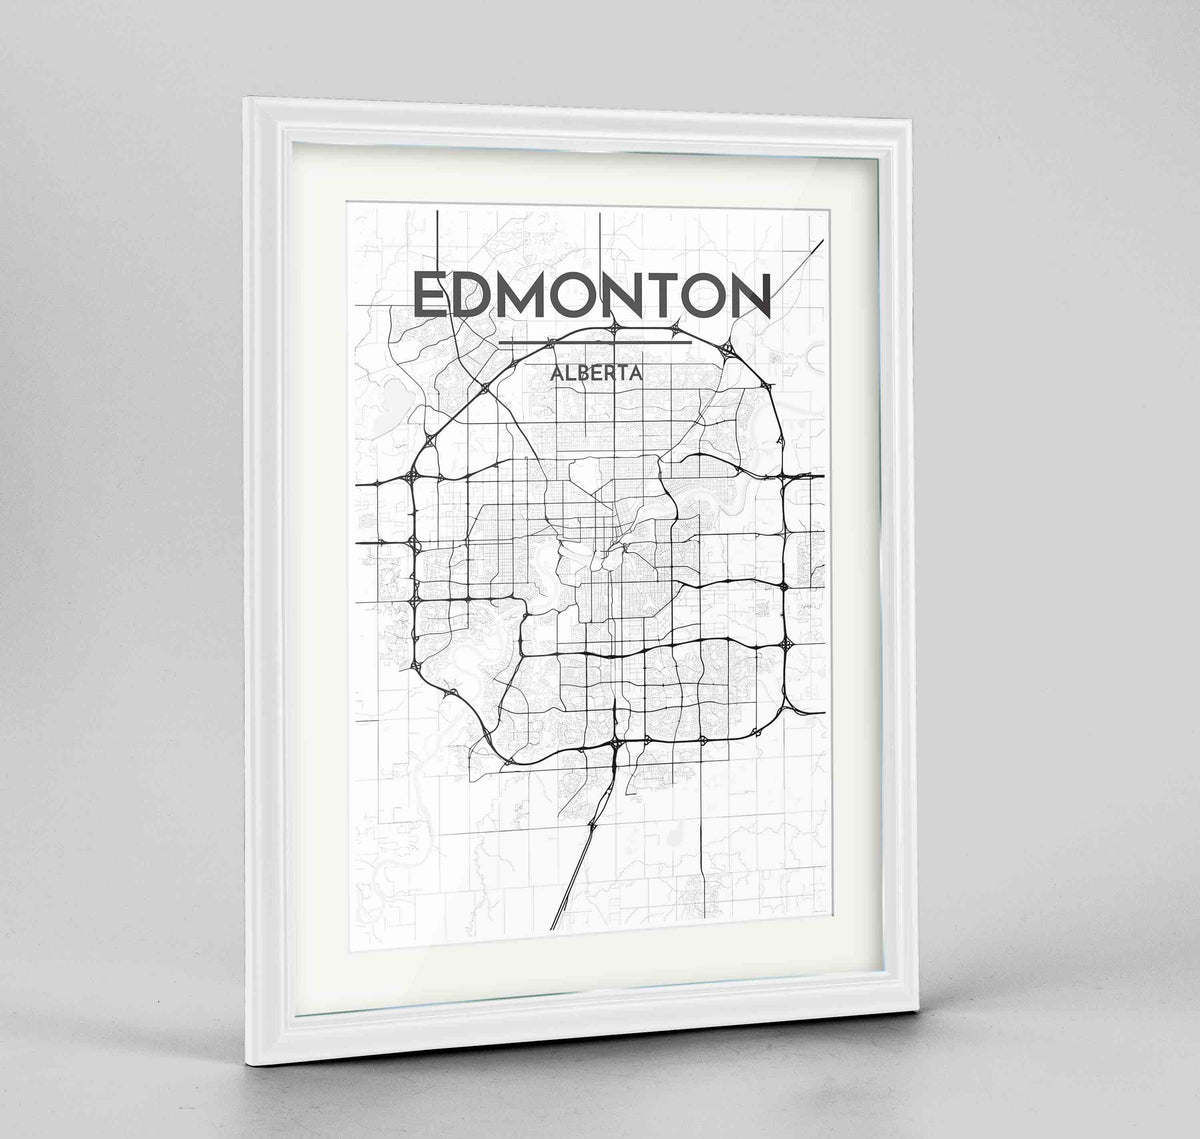 Framed Edmonton City Map 24x36&quot; Traditional White frame Point Two Design Group